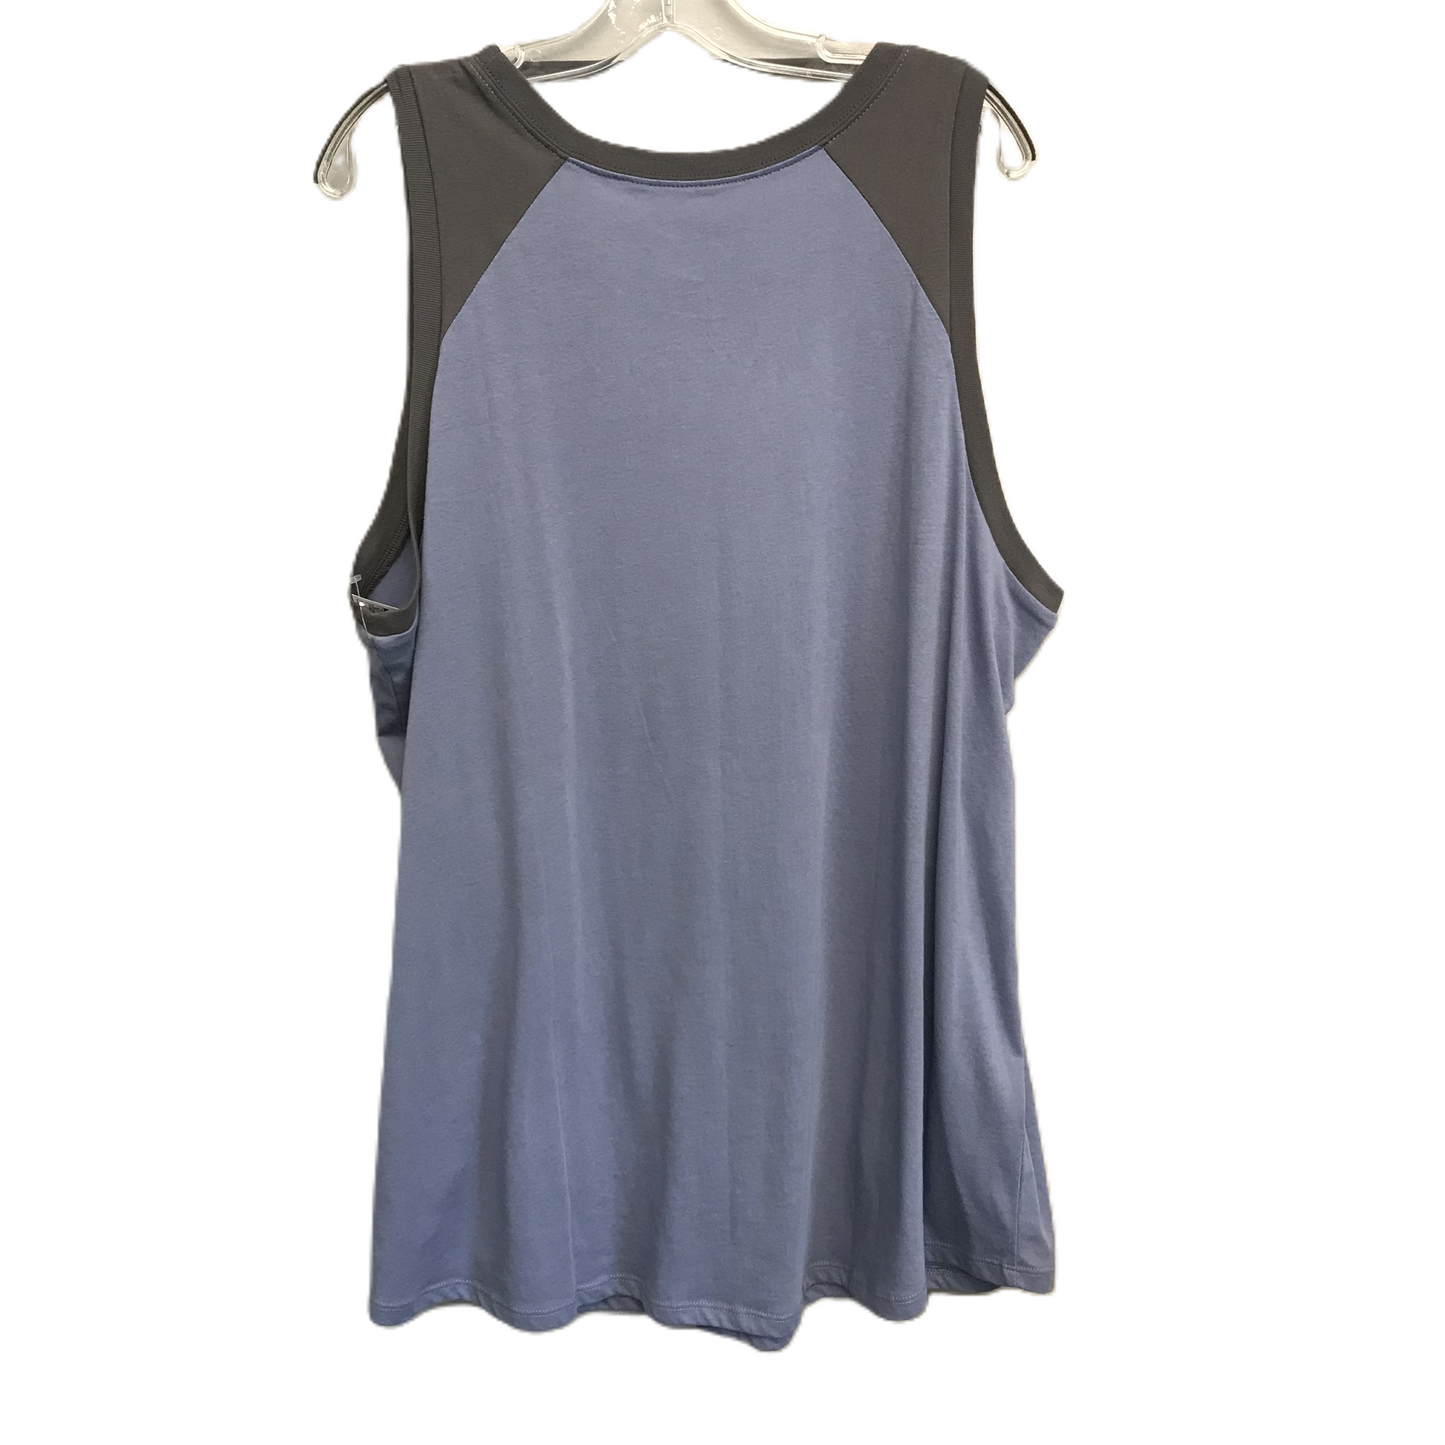 Blue Top Sleeveless By Torrid, Size: 3x